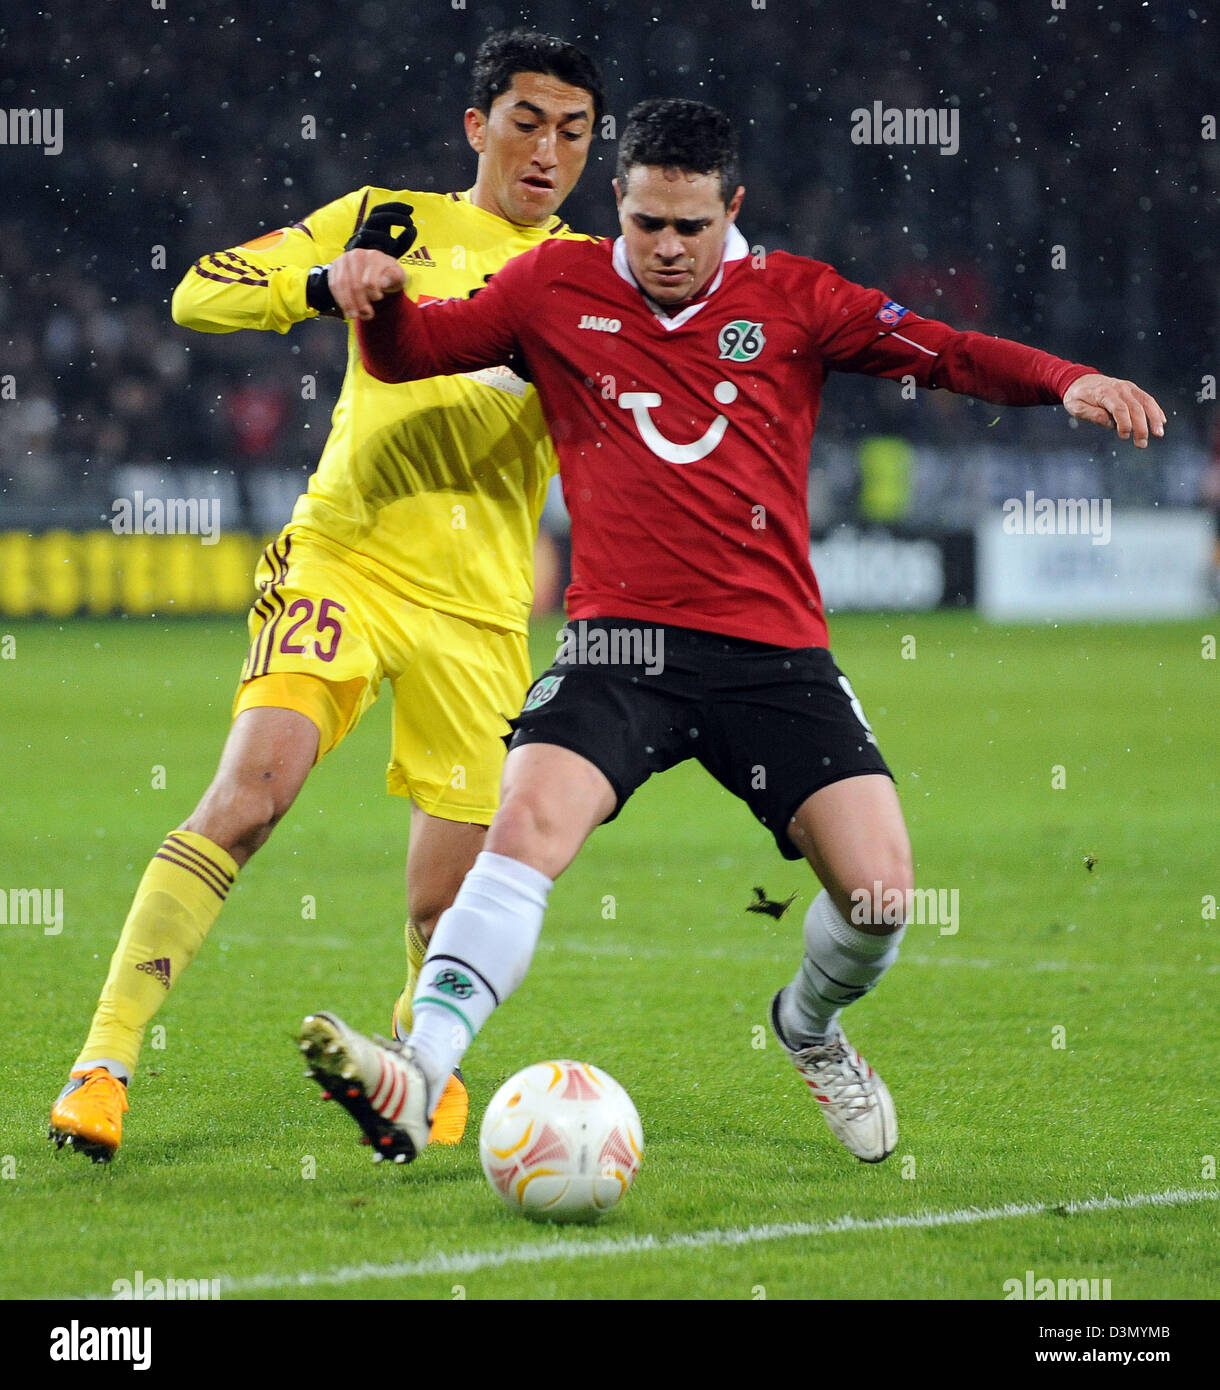 Hanover's Manuel Schmiedebach (R) and Odil Akhmedov of Makhachkala vie for the ball during the UEFA Europa League round of 32 second leg soccer match between Hanover 96 and FC Anzhi Makhachkala at Hannover Arena in Hanover, Germany, 21 February 2013. Photo: Peter Steffen/dpa +++(c) dpa - Bildfunk+++ Stock Photo